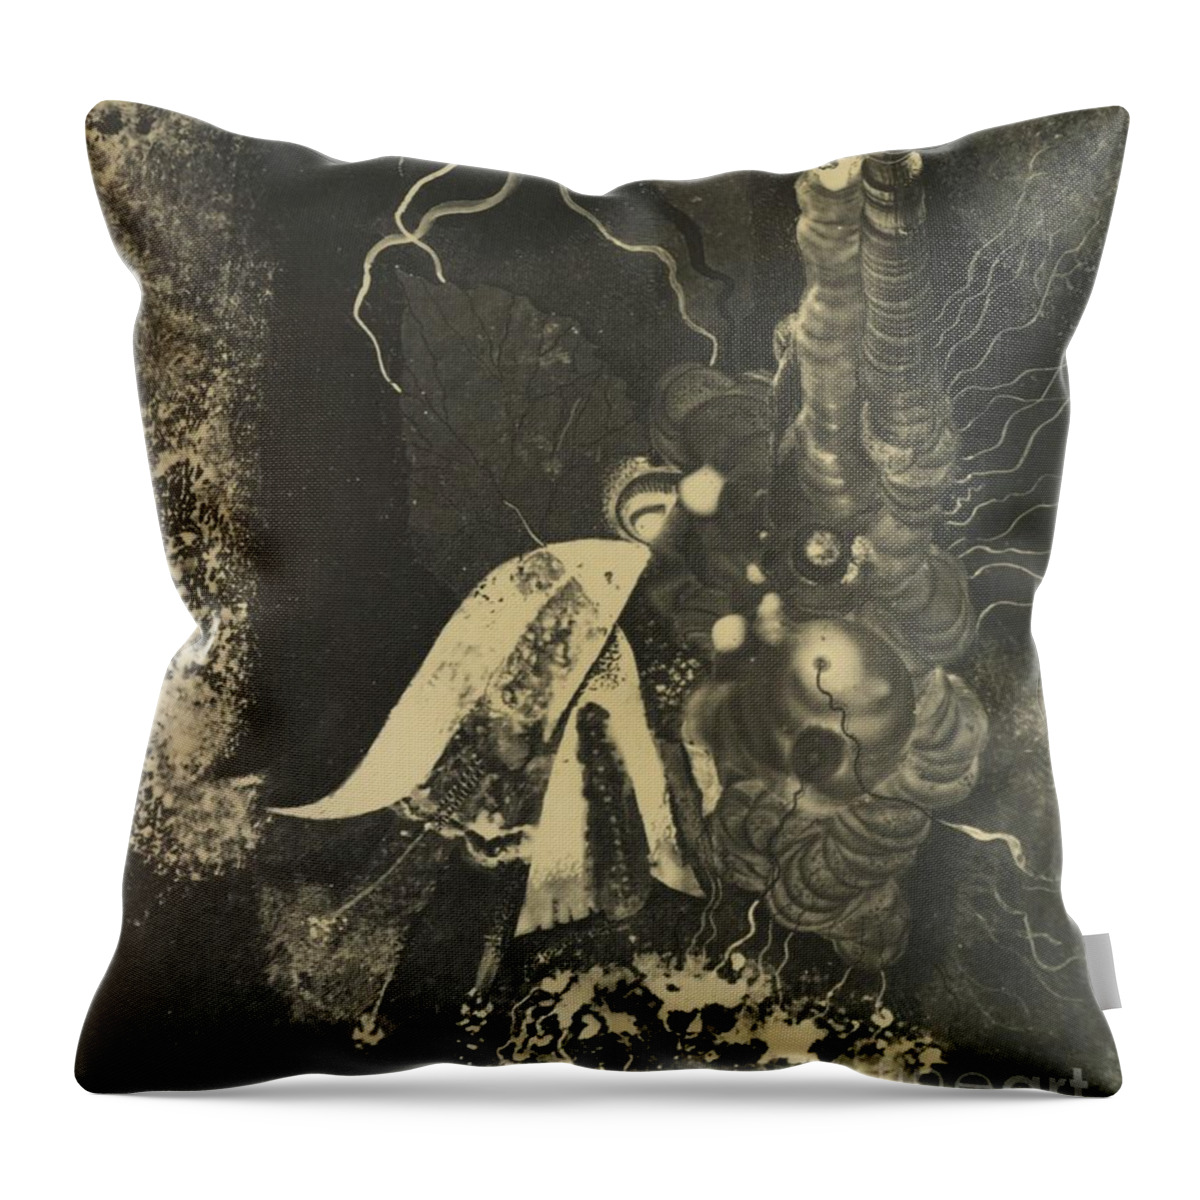 Karol Hiller 1891 - 1939 Polish Heliographic Composition Throw Pillow featuring the painting Polish Heliographic Composition by MotionAge Designs